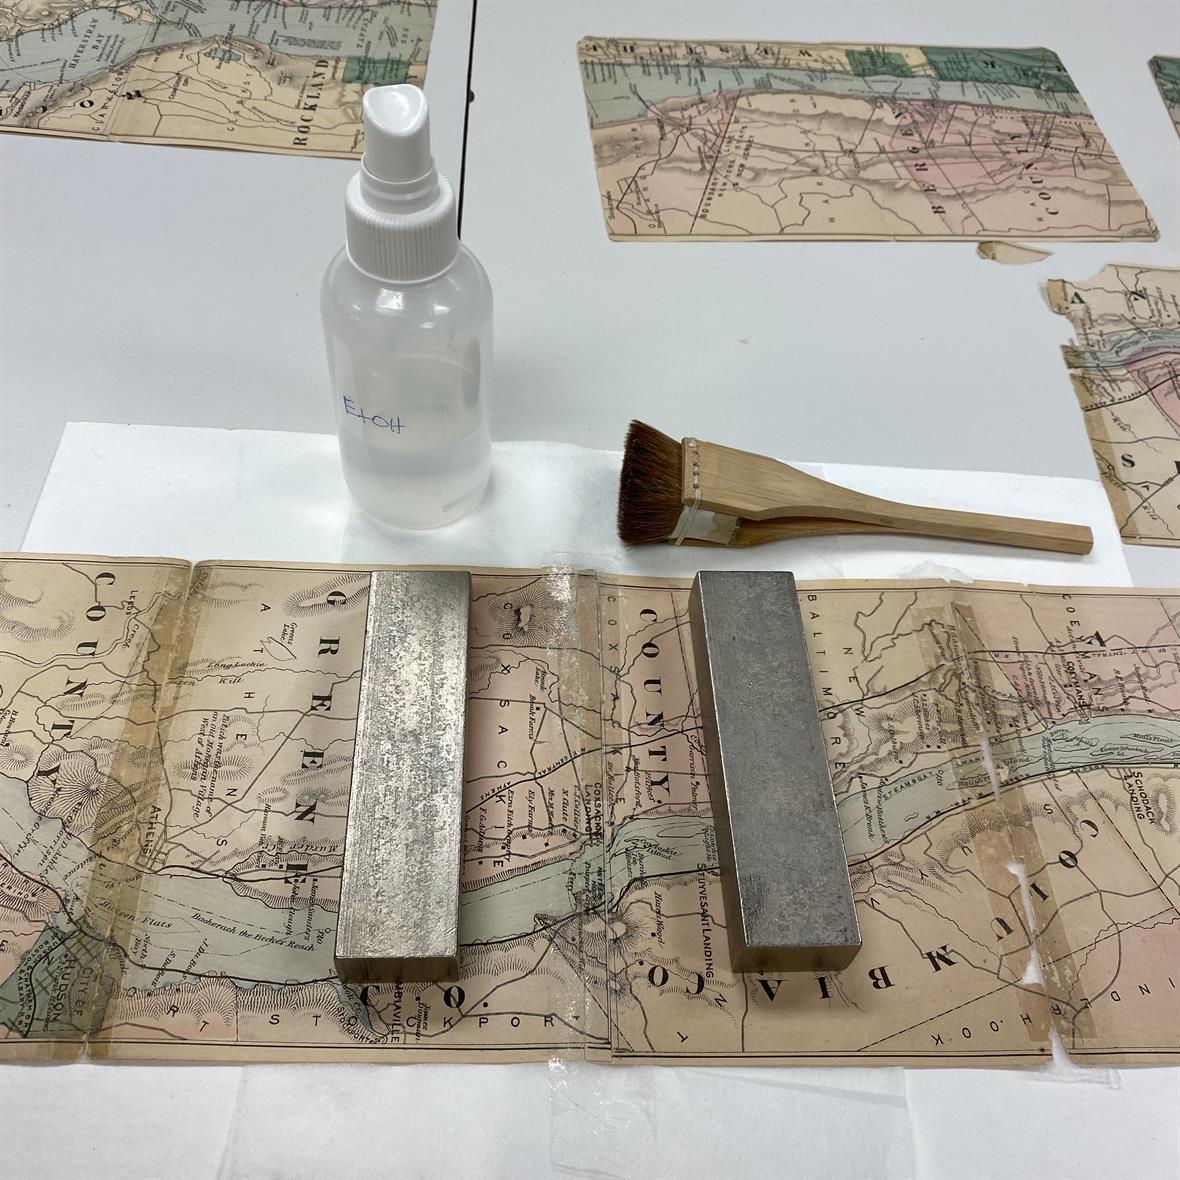 A portion of the map laying on a table, image side up, held in position with weights.